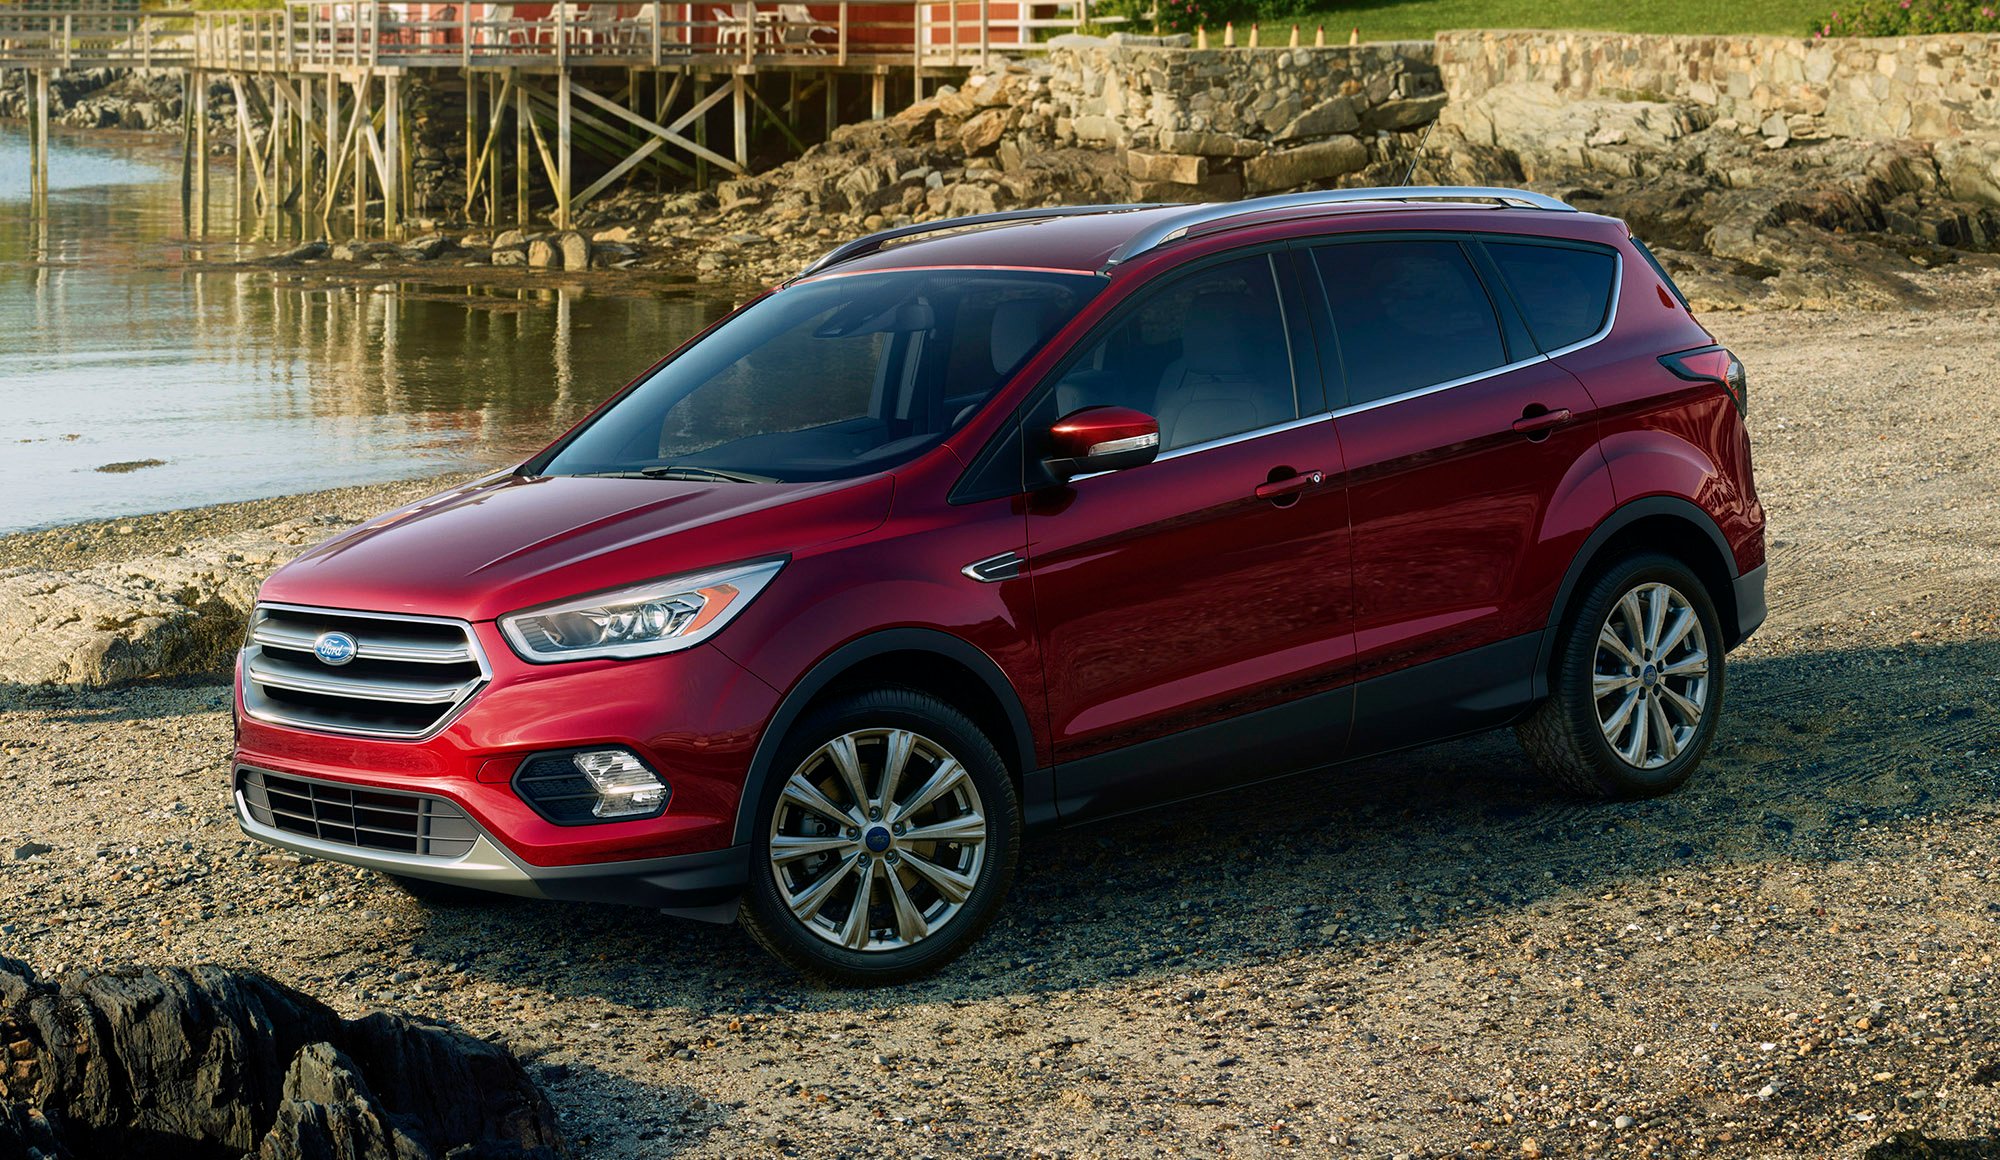 2017 Ford Kuga revealed as facelifted Escape: New looks ... 2006 ford escape fuse box 